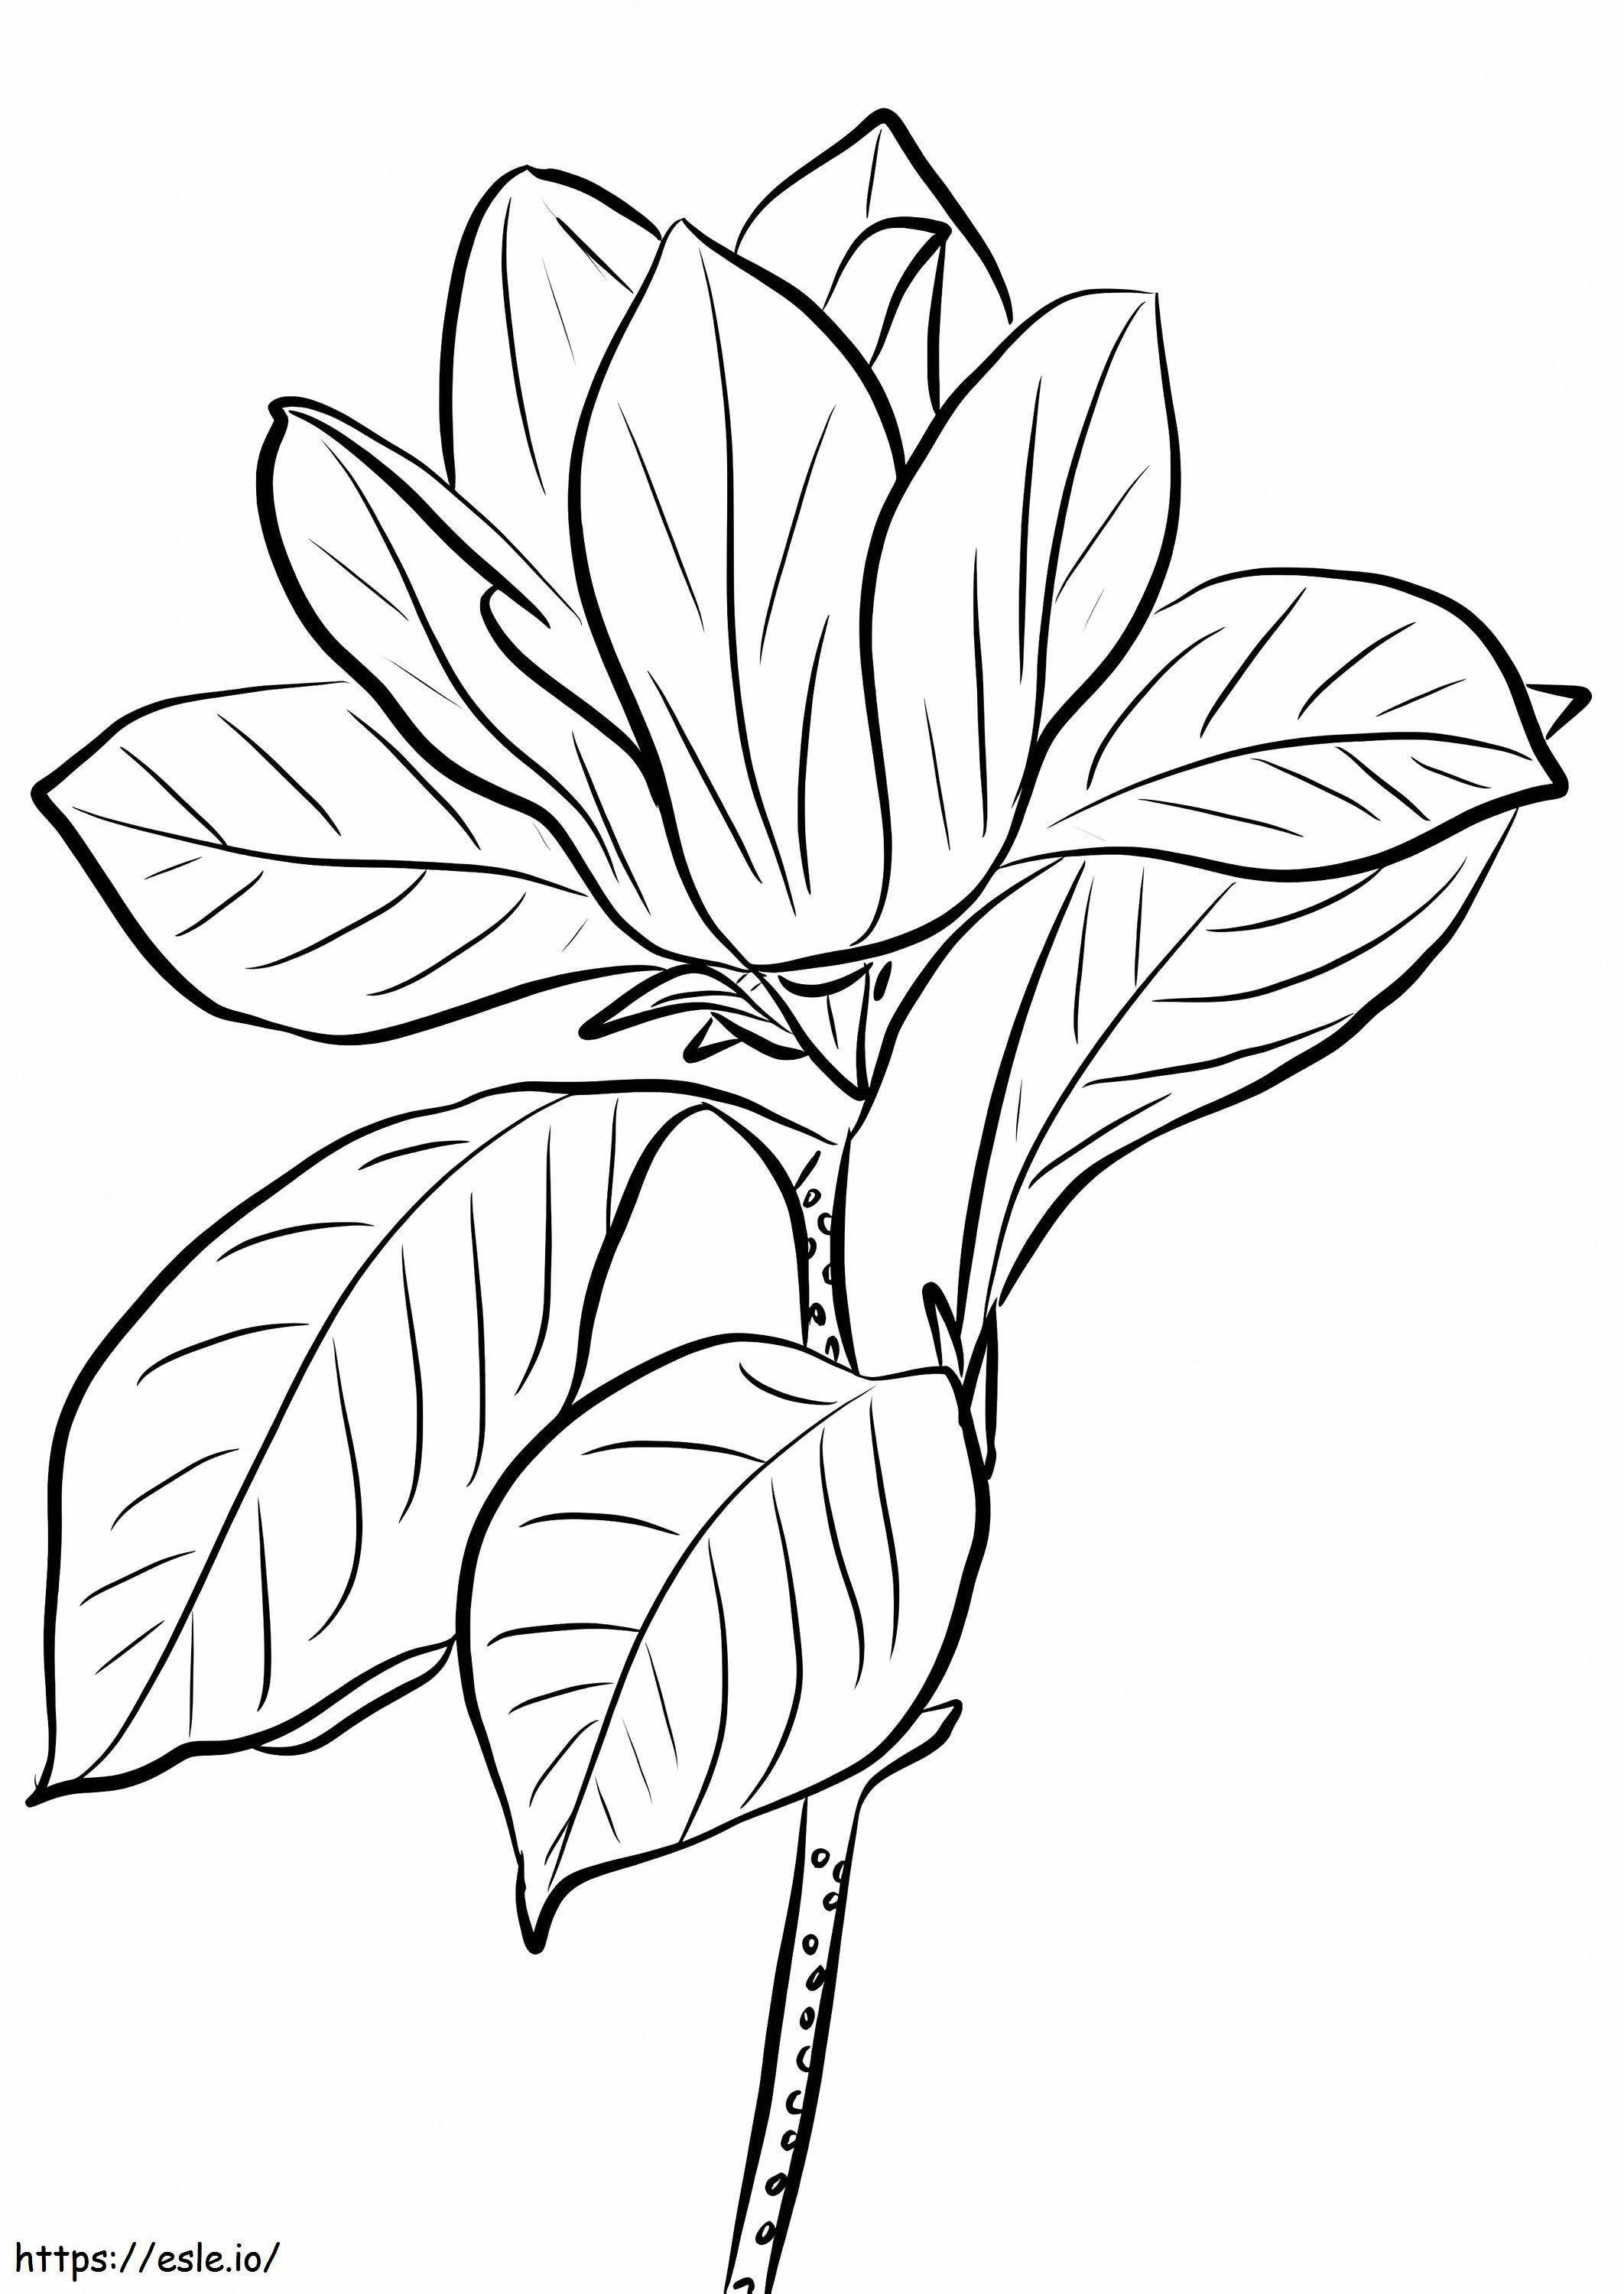 Magnolia Flower 17 coloring page